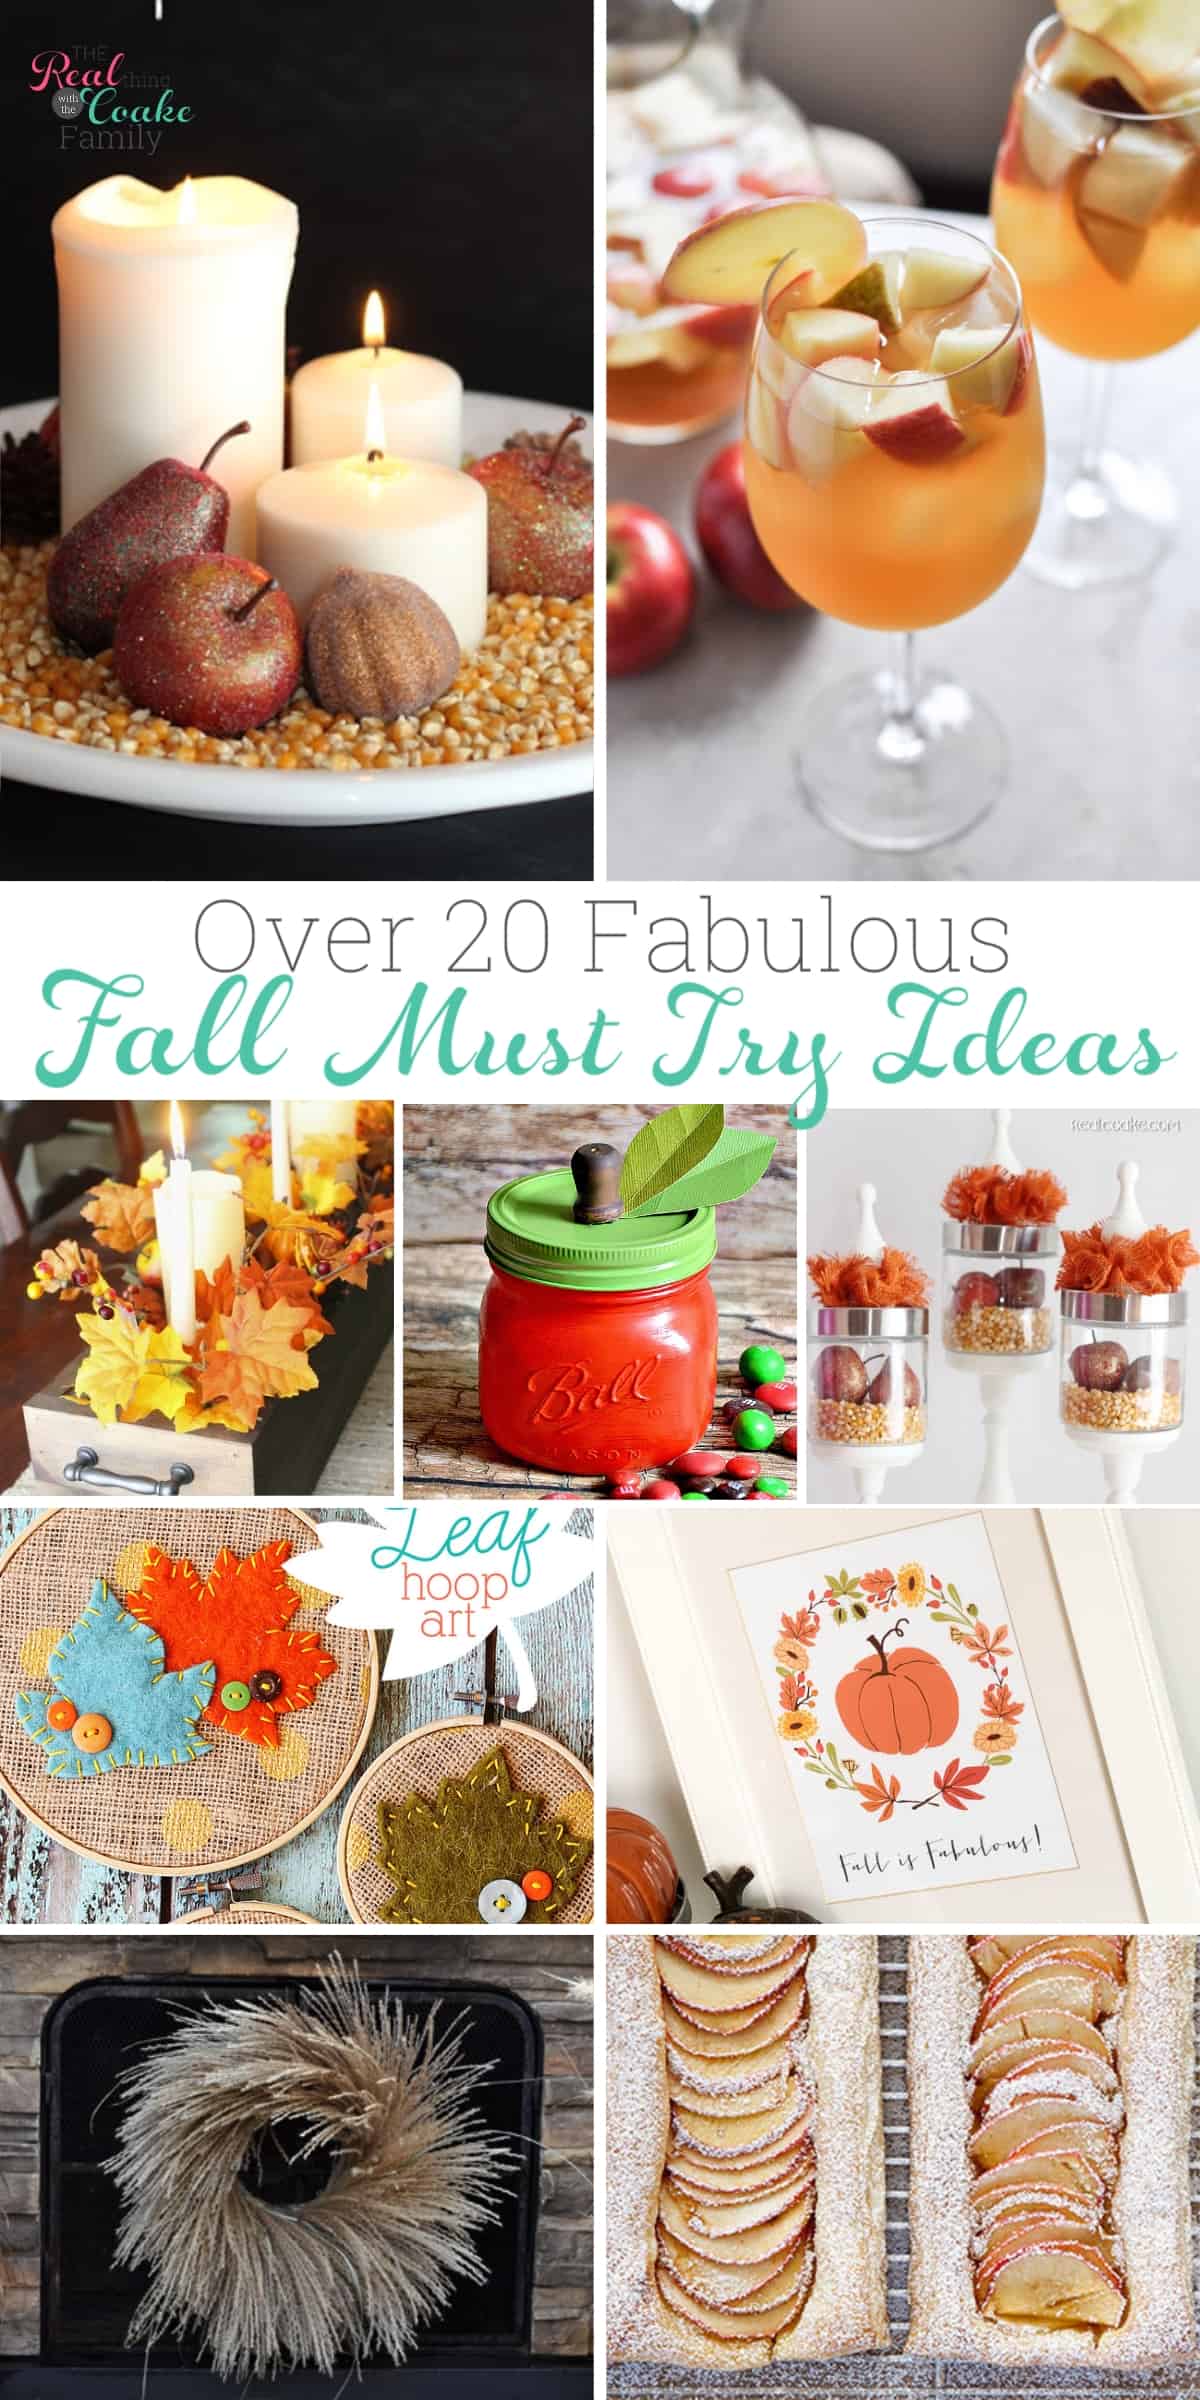 Over 20 Amazing Fall Ideas You Need to Try Today